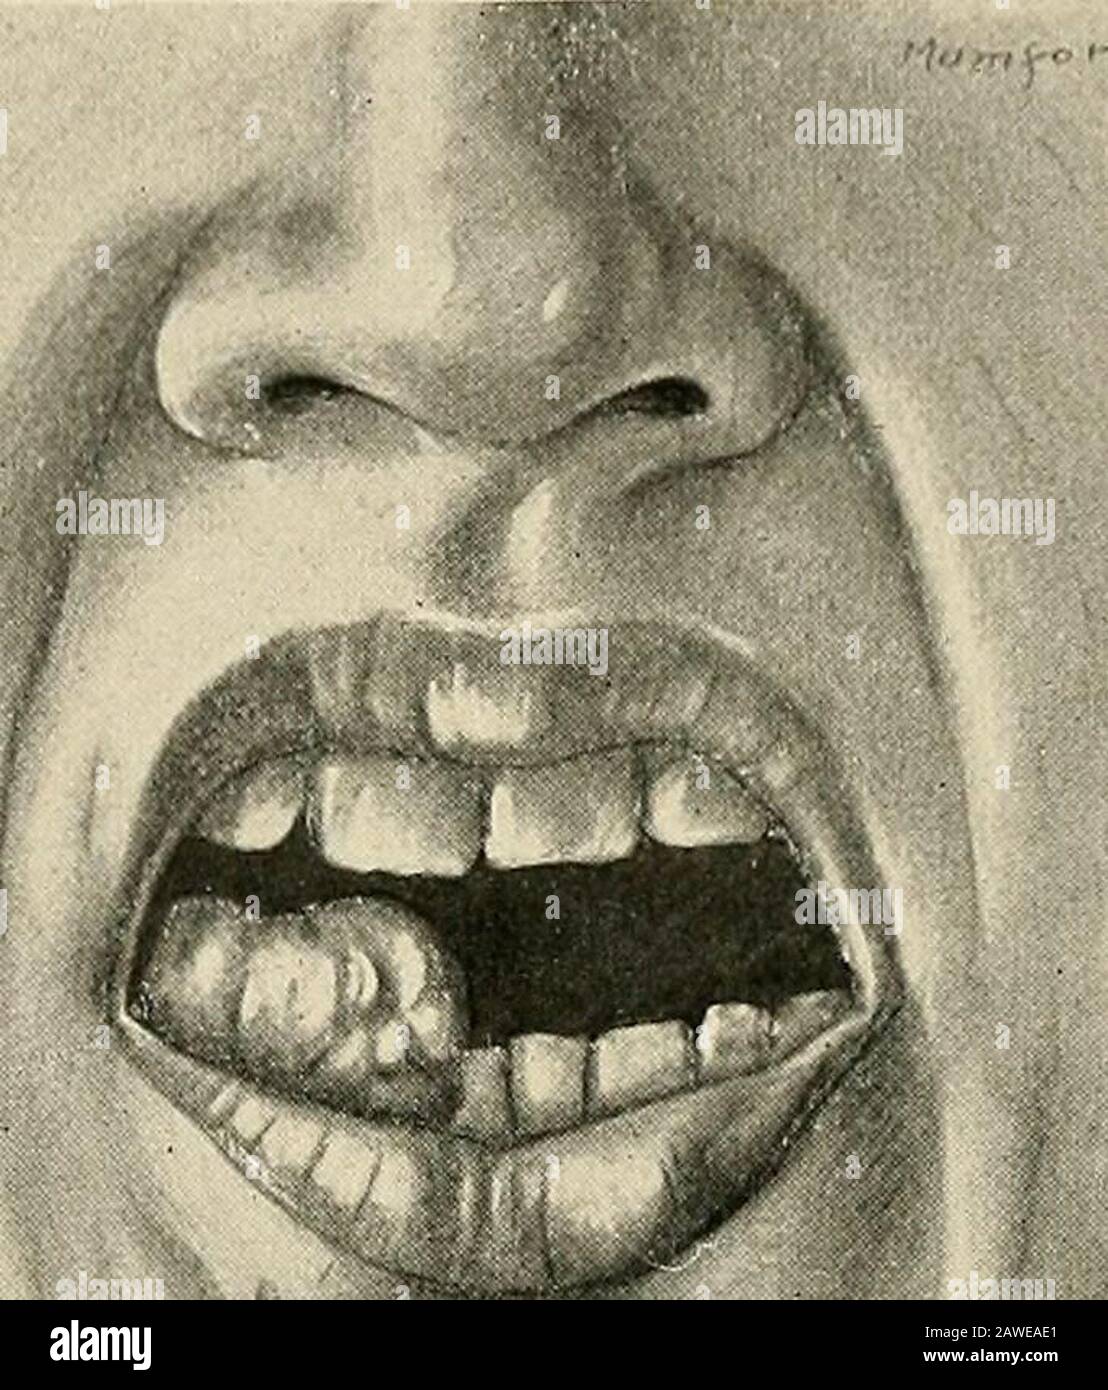 The practice of surgery . and tendsto envelop the bone. It appears at the edge of the teeth as a curious pig- Fig. 371.—A follicular odon-toma from the right half of themandible of a boy aged fourteenyears (Bland-Sutton in KeensSurgery). TUMORS OF THE JAWS 563 merited excrescence, and is the only form of pigmented sarcoma thatis not exceedingly malignant. If untreated, it spreads gradually so asto involve largo portions of the jaw, and causes falling of the teeth untileventually, and after many years, it kills the patient through encroach-ment upon, and destruction of, important organs. It is Stock Photo